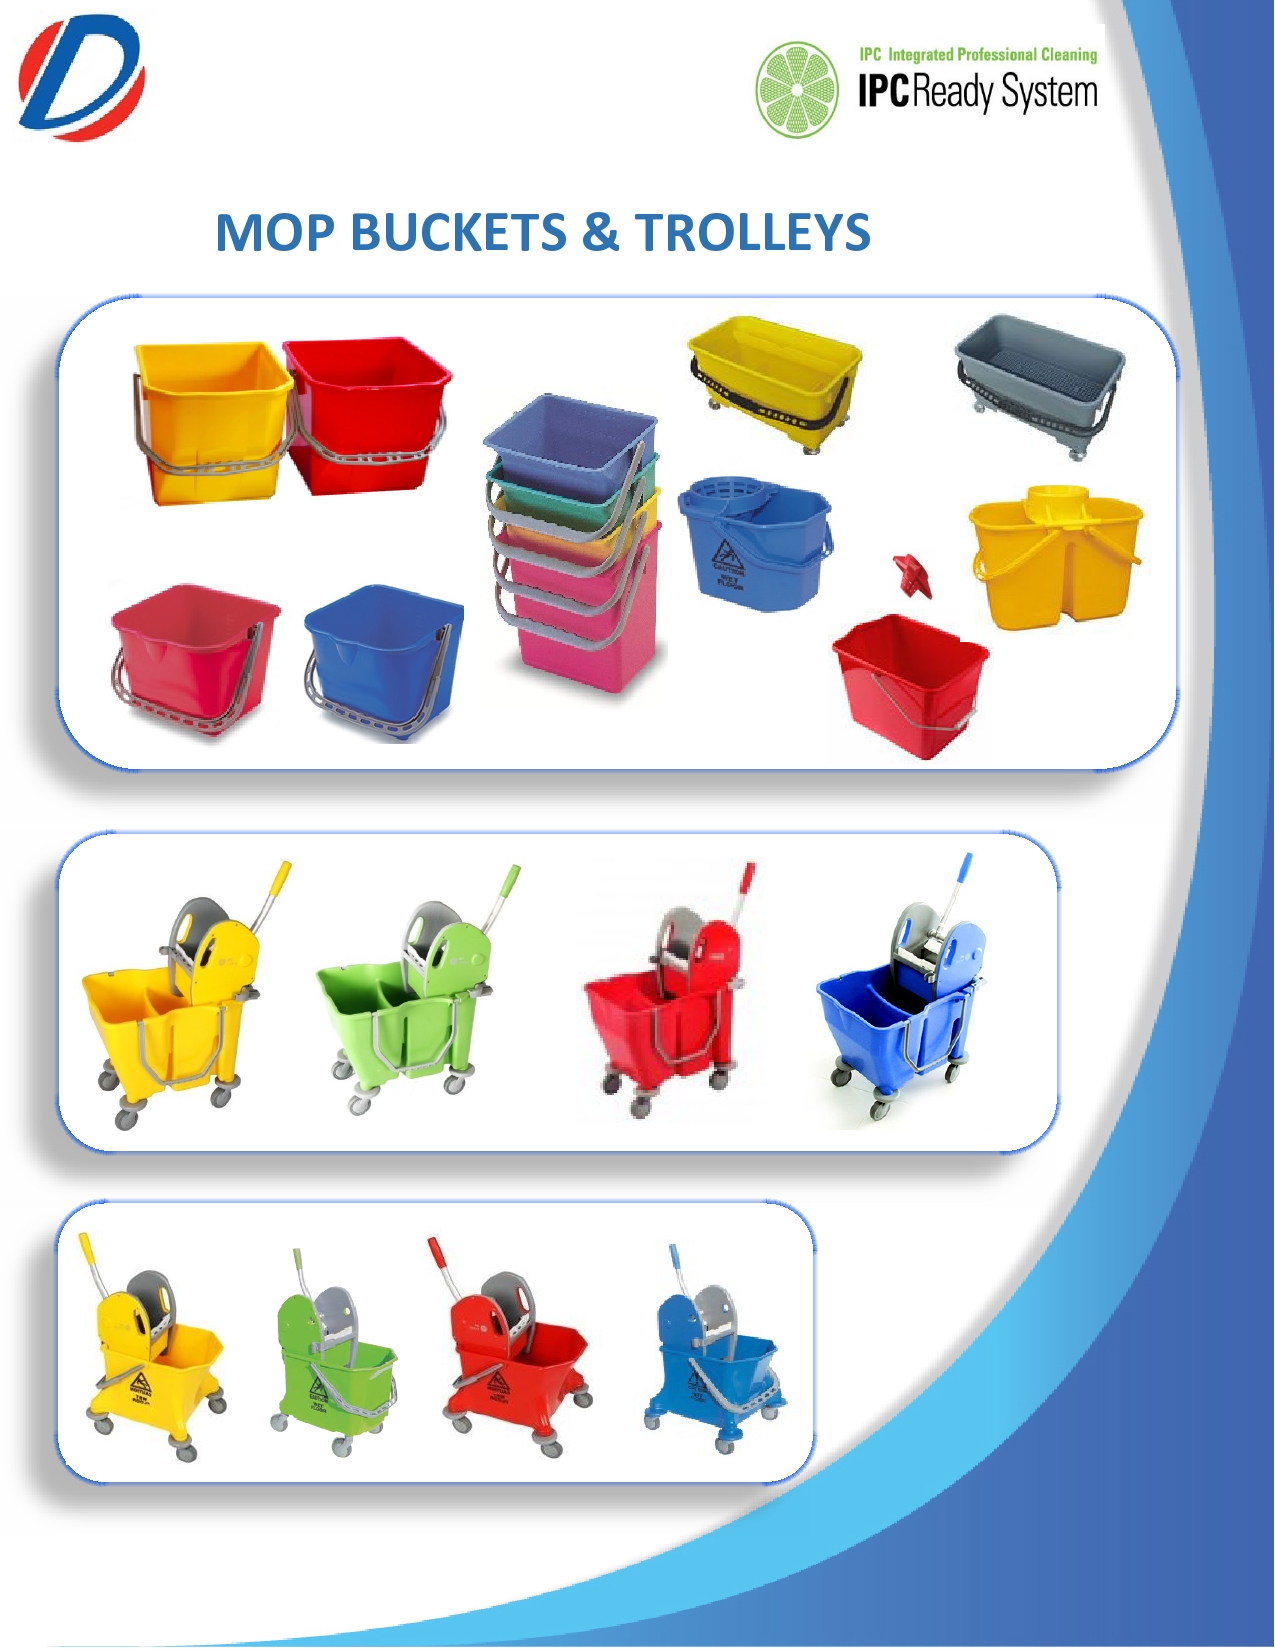 Mop Buckets And Mop Wringers 